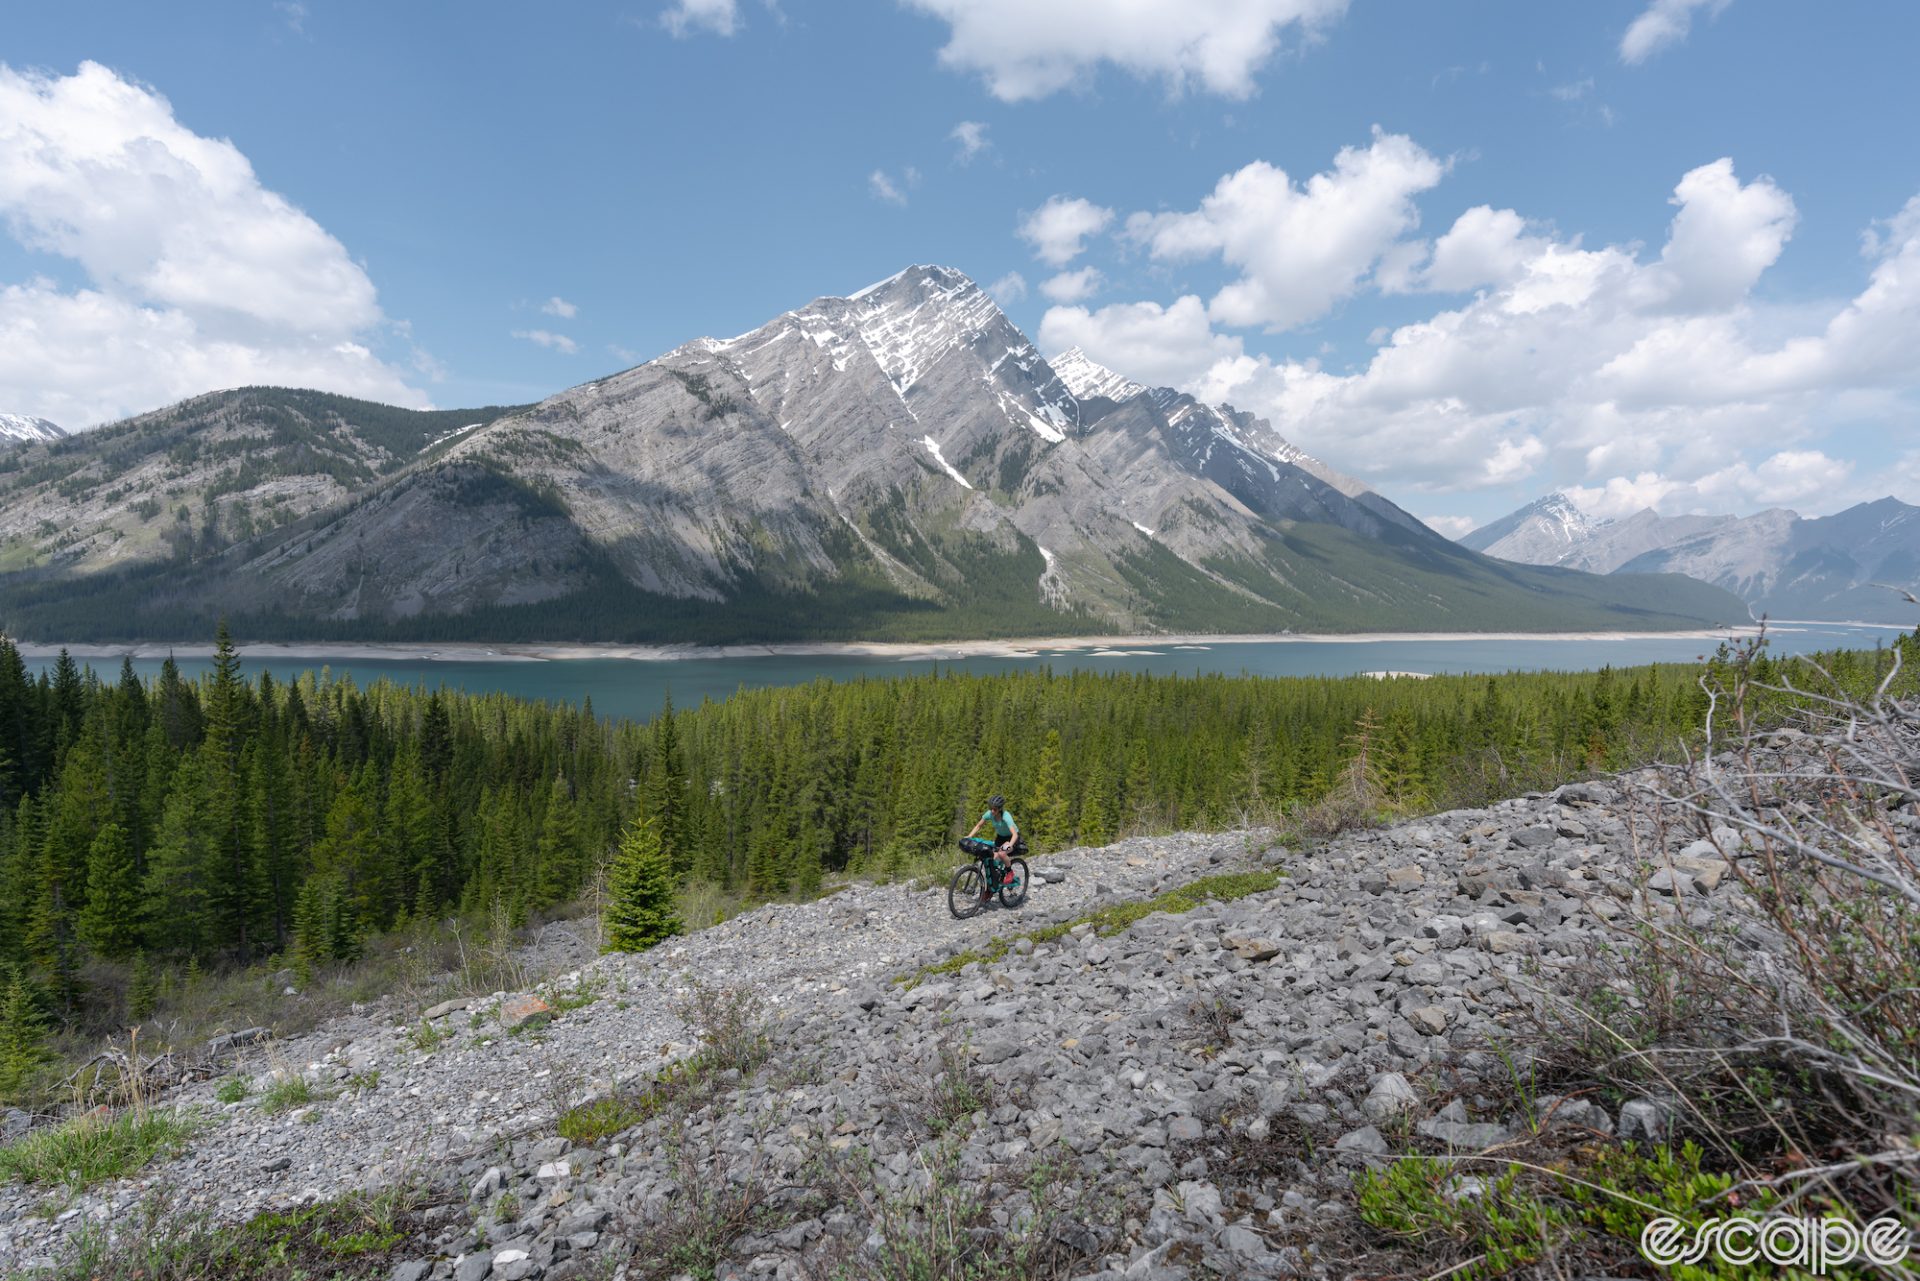 A lone cyclist traverses a loose, rocky trail above an alpine lake. A high peak in the background still has snowfields.